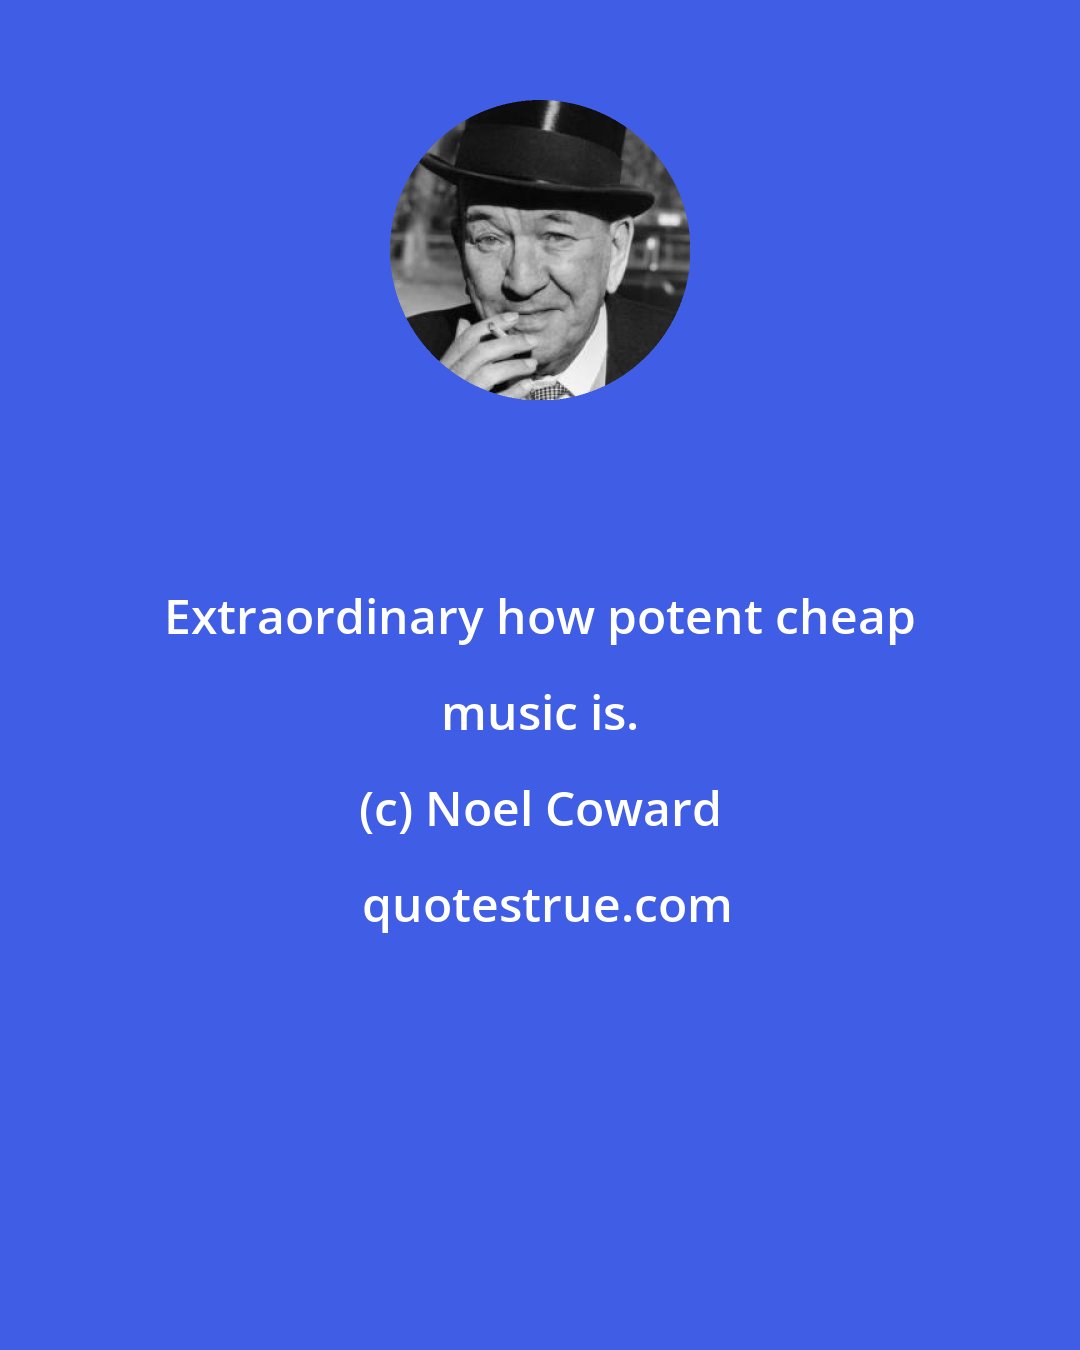 Noel Coward: Extraordinary how potent cheap music is.